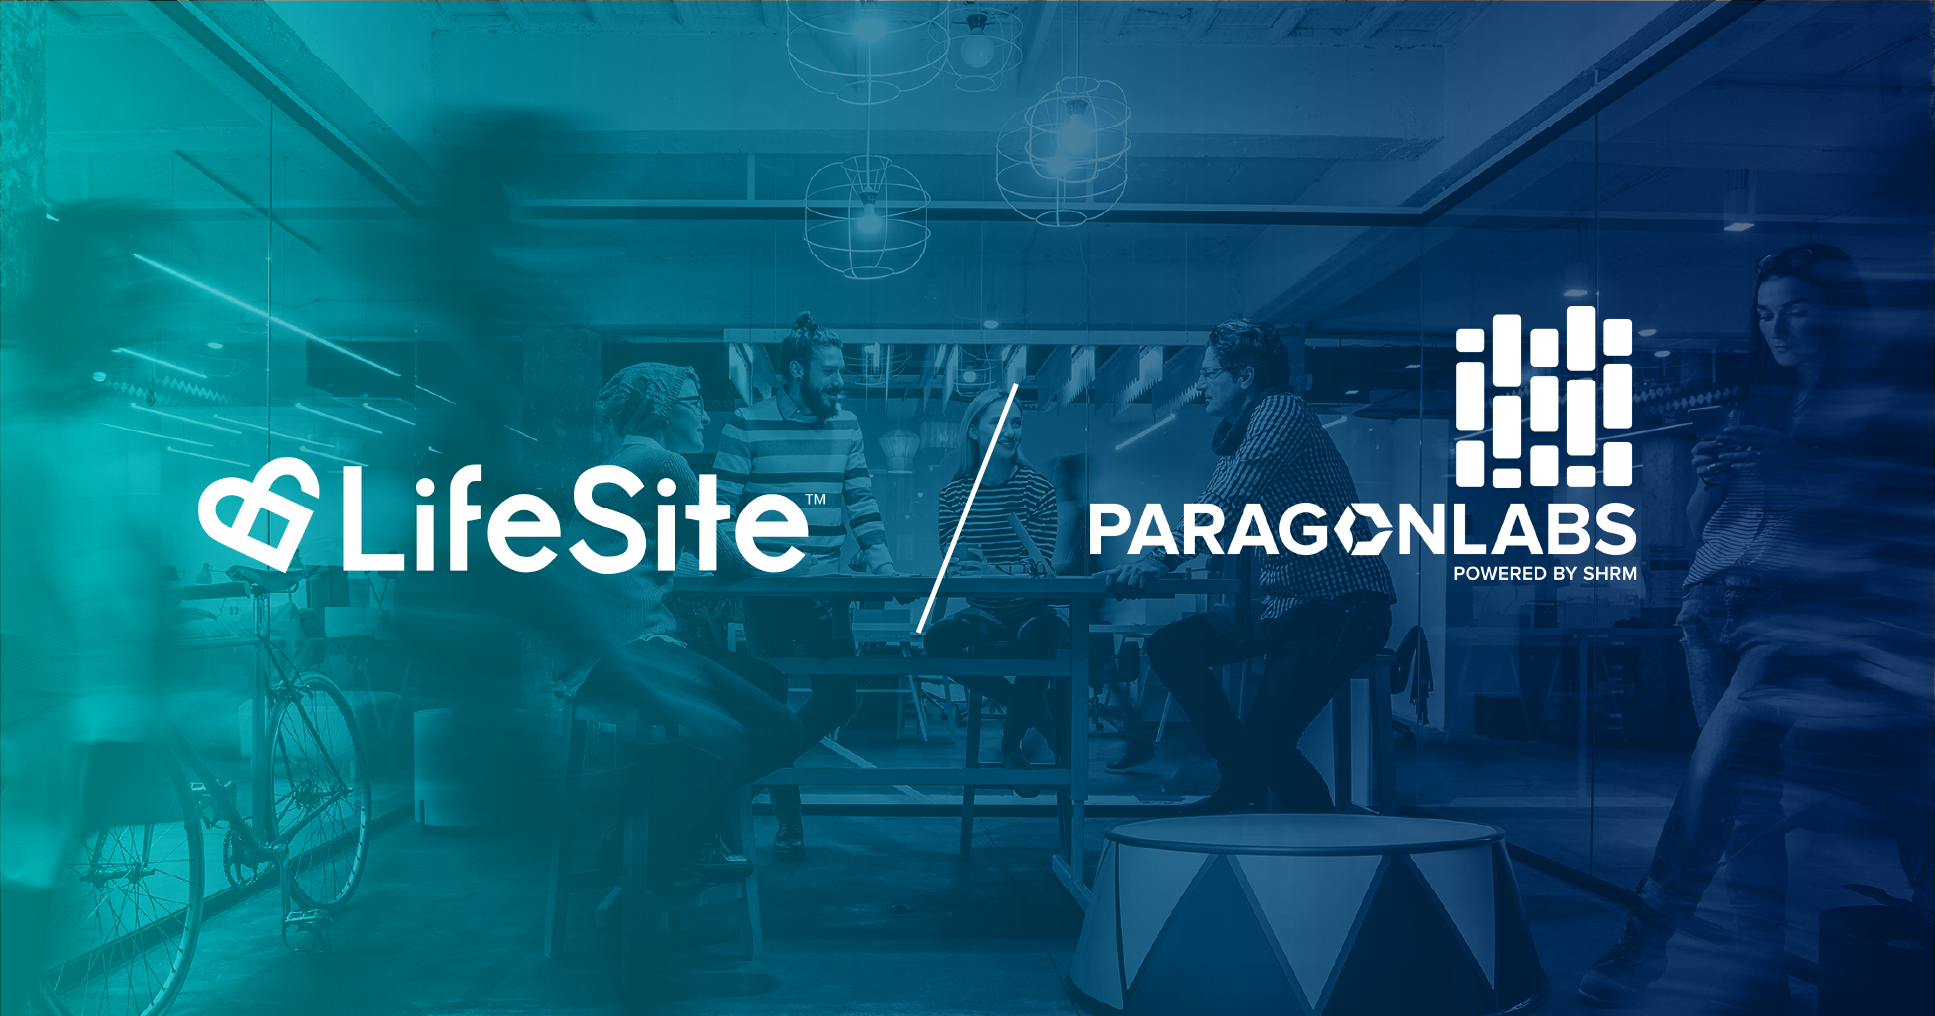 LifeSite Partners with ParagonLabs, powered by SHRM